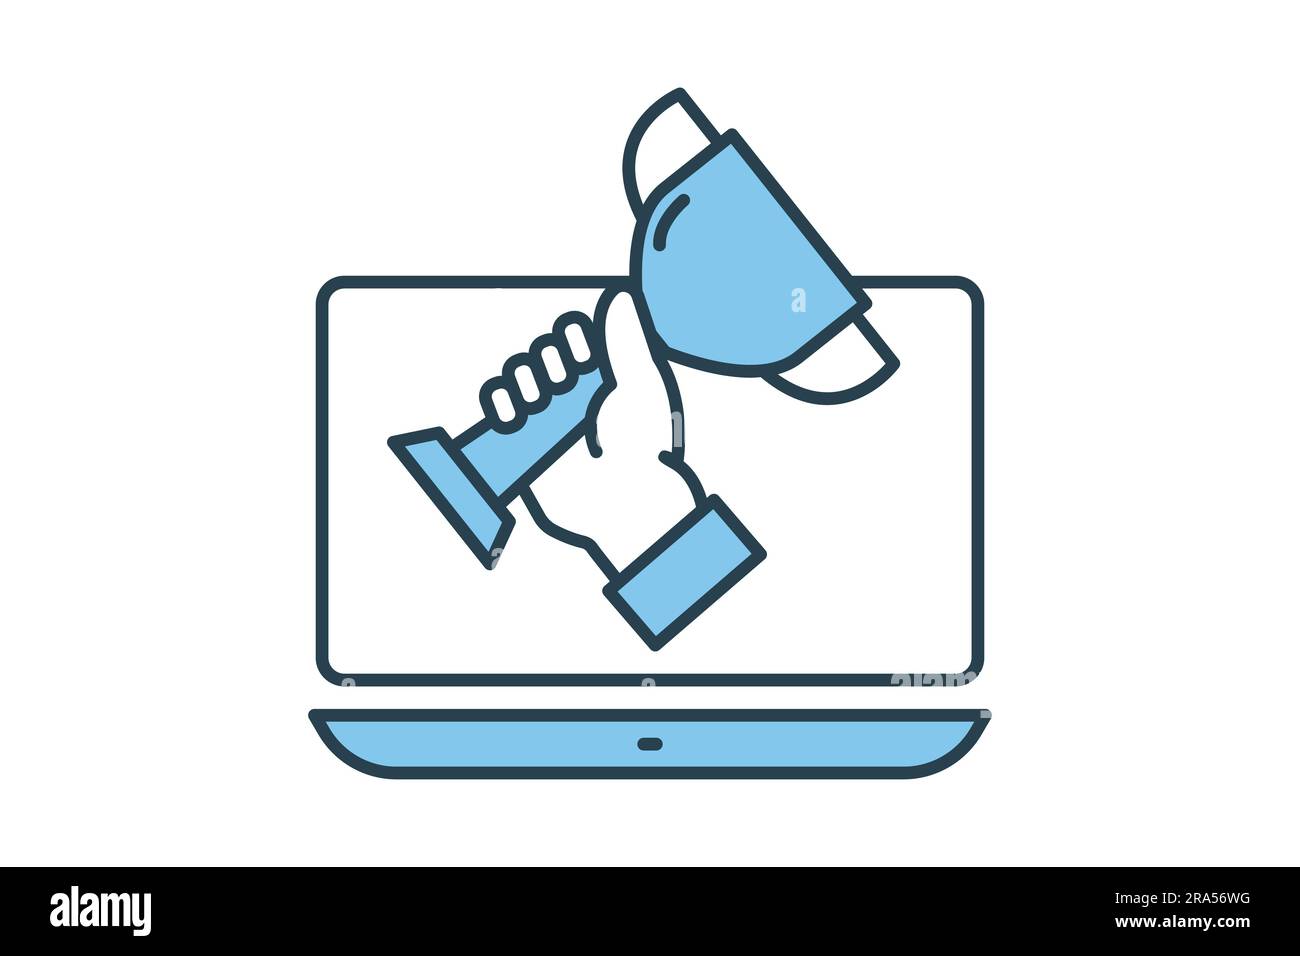 competition win icon. winner award ceremony, cup on the laptop. icon related to winner, success, victory. Flat line icon style design. Simple vector d Stock Vector